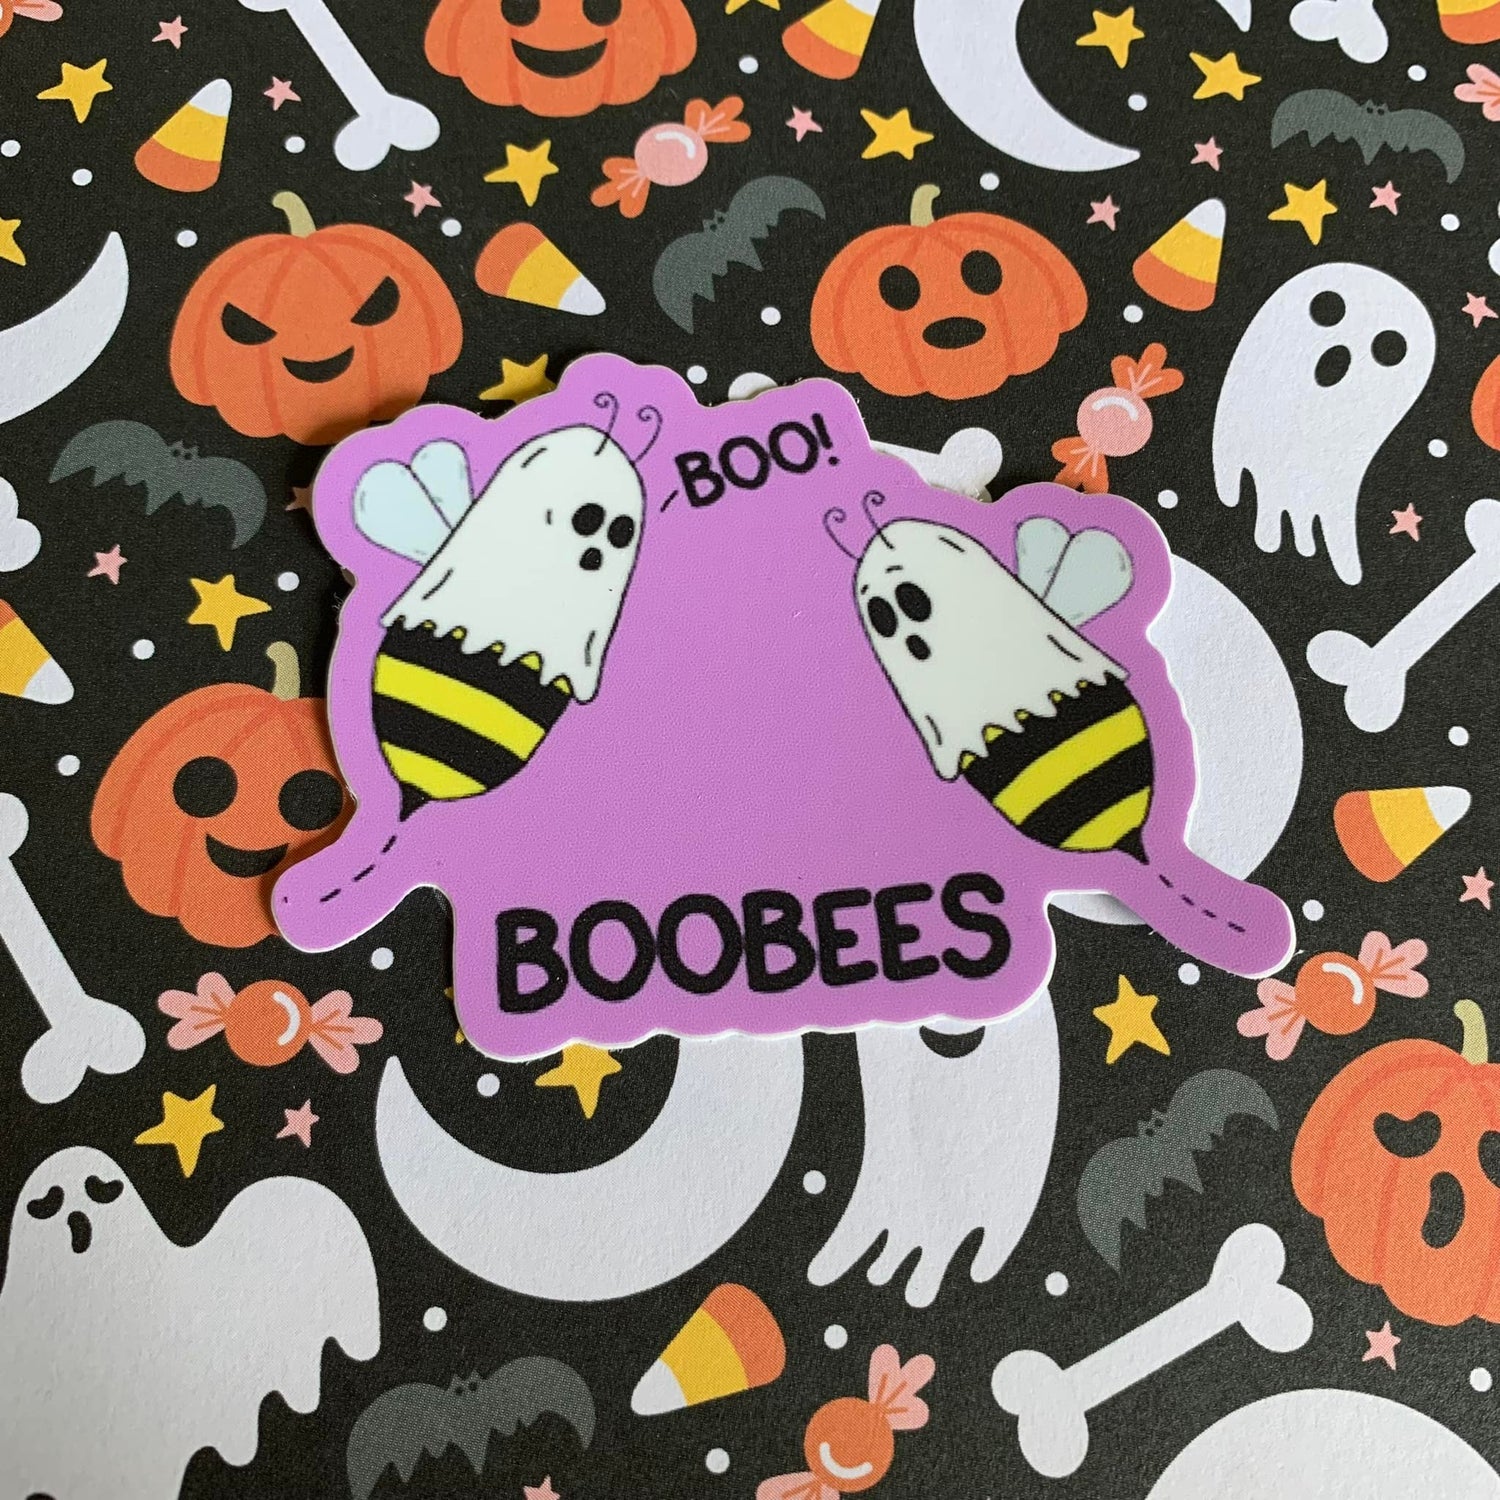 A photo of a sticker of two cartoon bees with sheets on their heads. Text on sticker reads 'BooBees.'